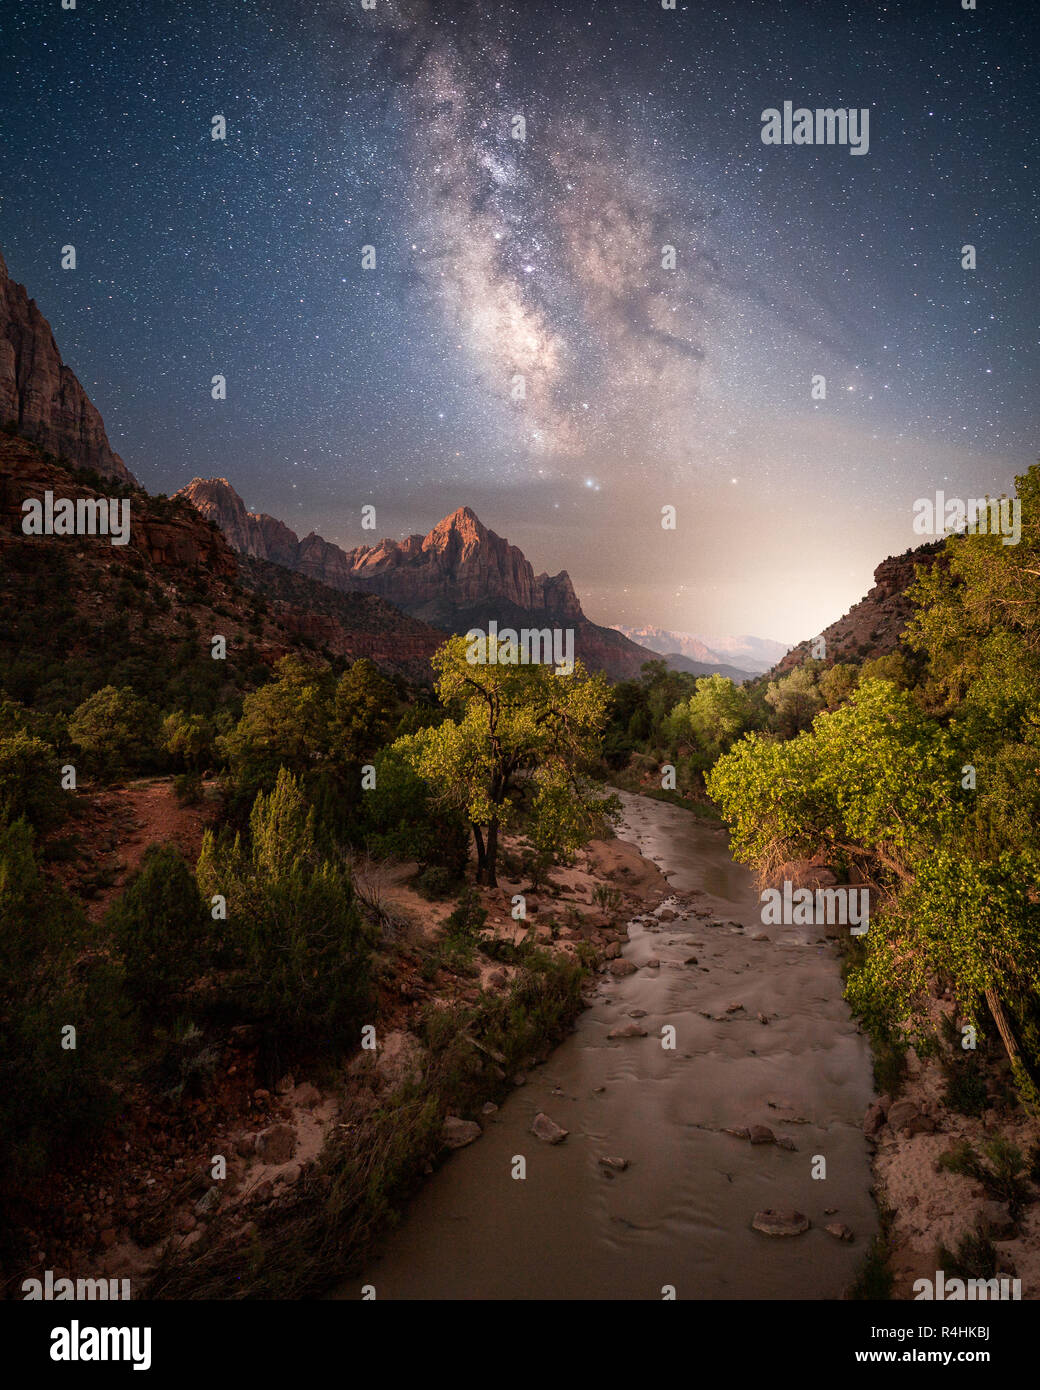 Milky way above Virgin River And Watchman Mountain,  Canyon Junction, Zion National Park, Utah, United States Stock Photo